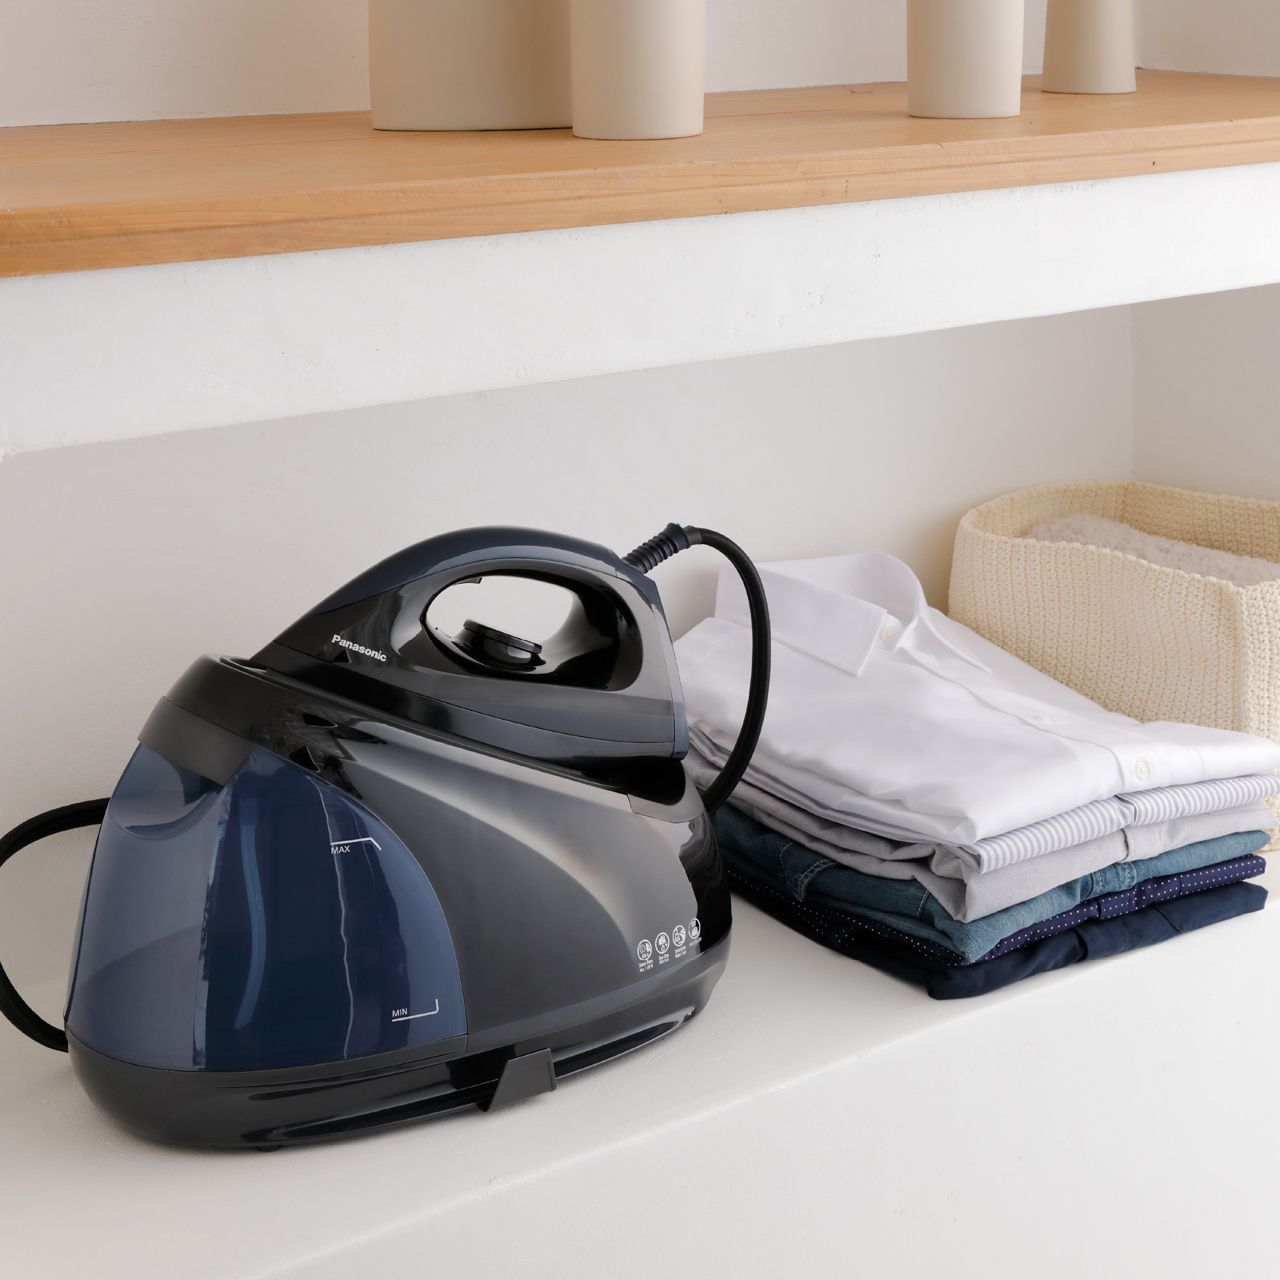 Steam generator irons review фото 24